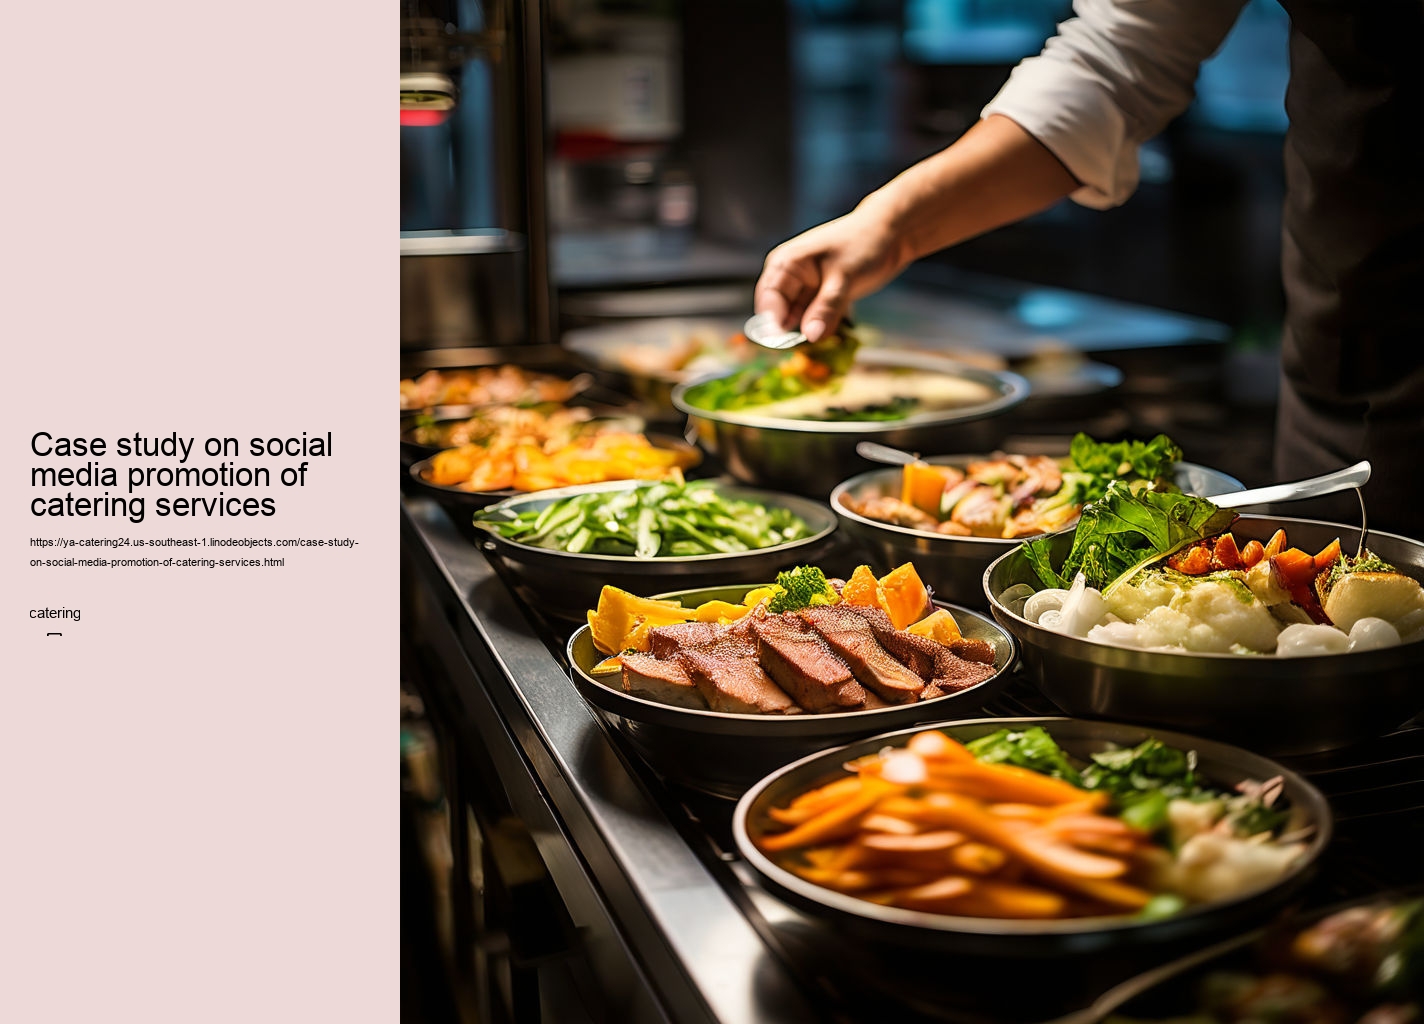 Case study on social media promotion of catering services